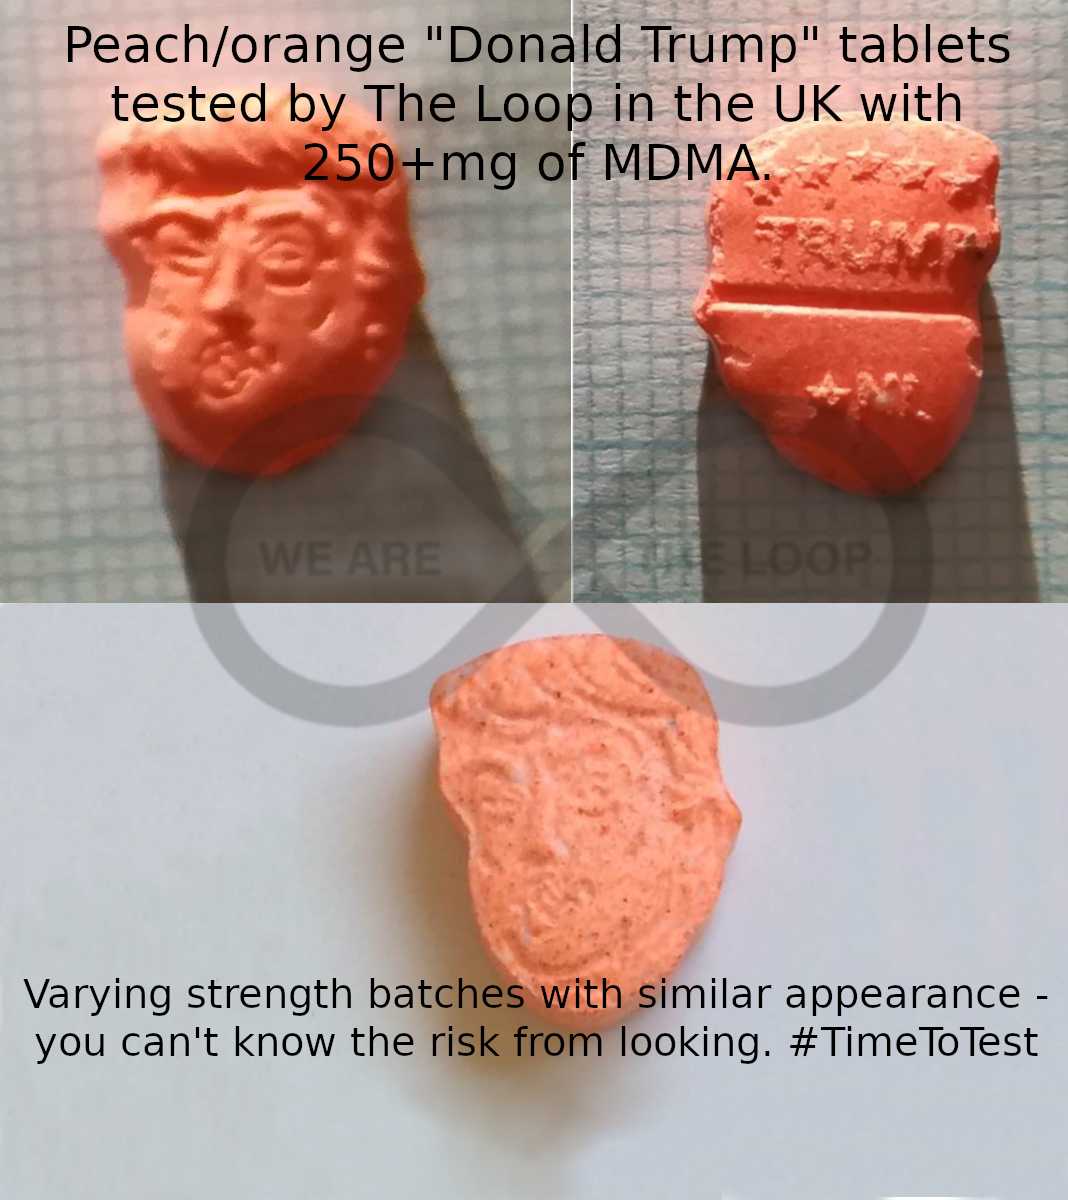 Donald Trump tablets tested @Y_Not_Festival containing 250+mg of MDMA - over two doses in one tablet. Others tested in Europe around 200mg - the only way to tell is to test. #StartLowGoSlow #LoopAlert #DrugAlert #TimeToTest.